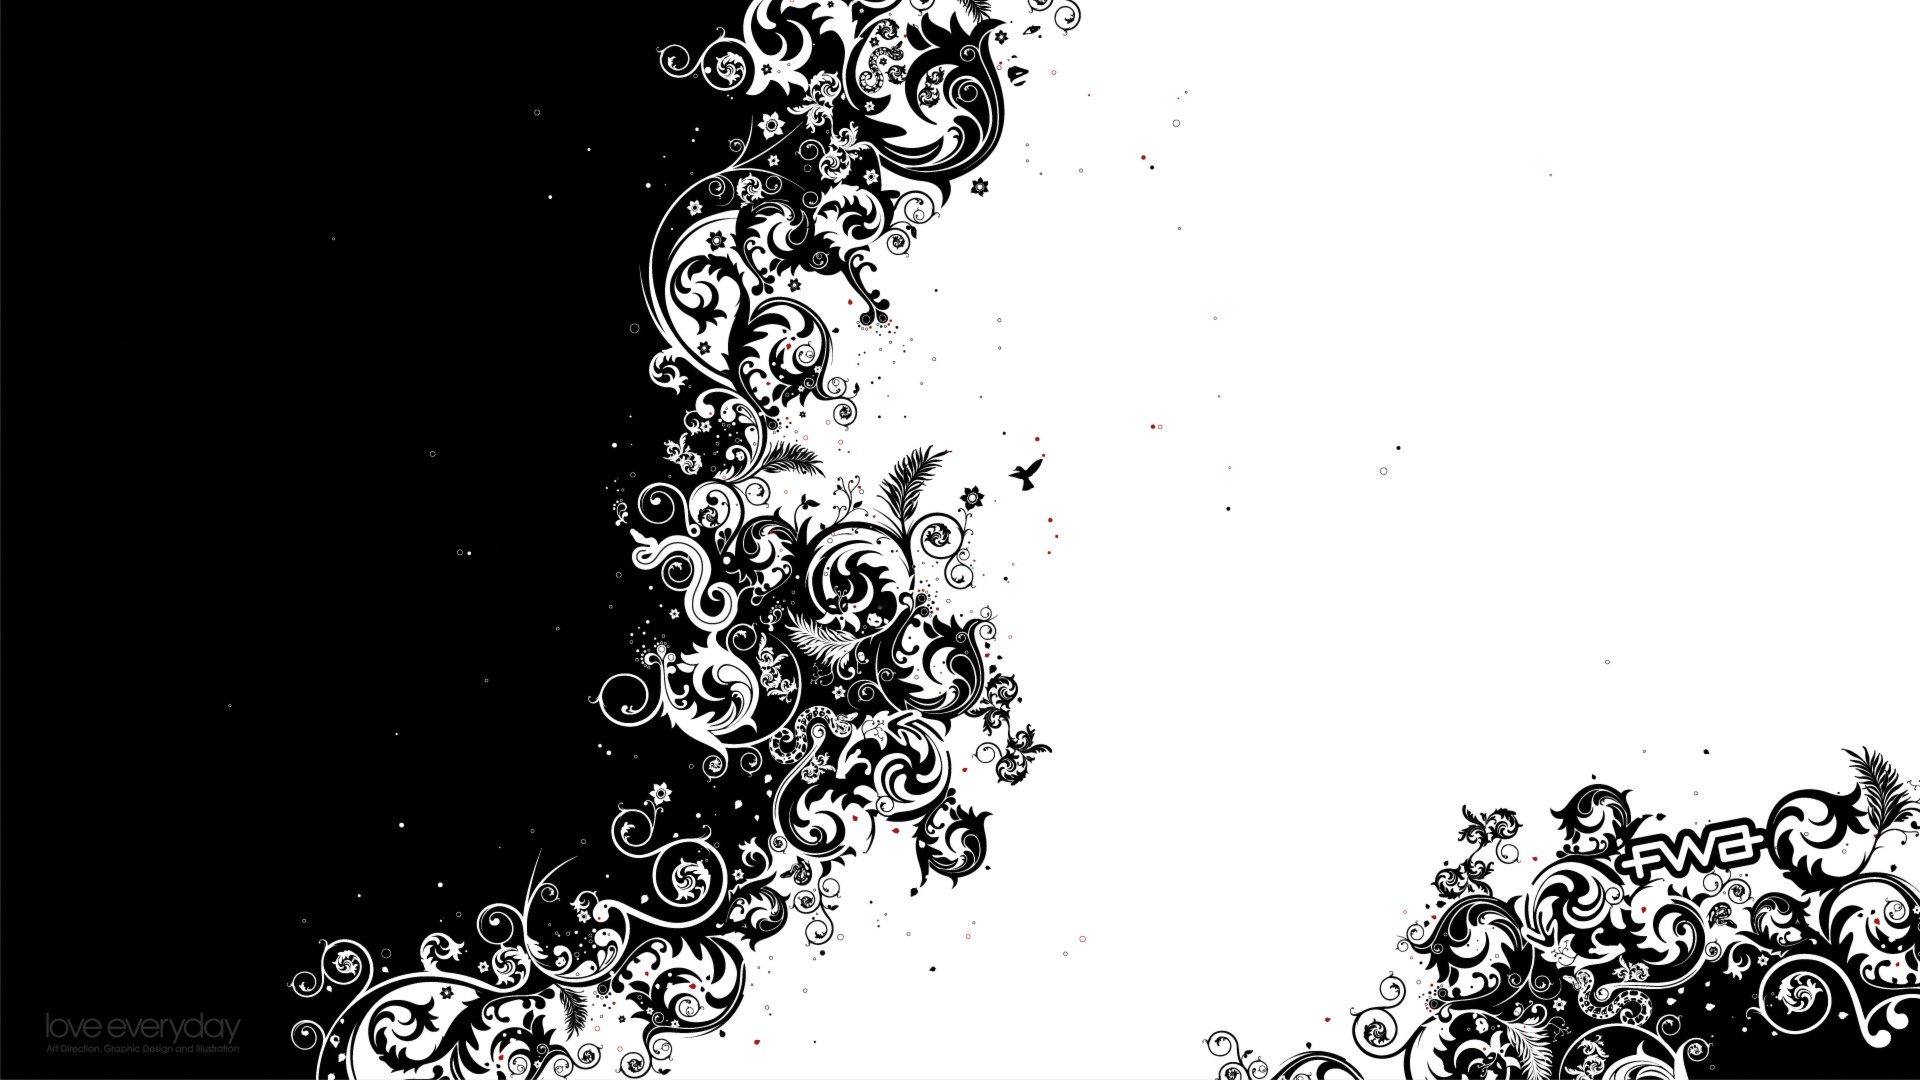 70 HD Black And White Wallpapers For Free Download (Resolution 1080p)